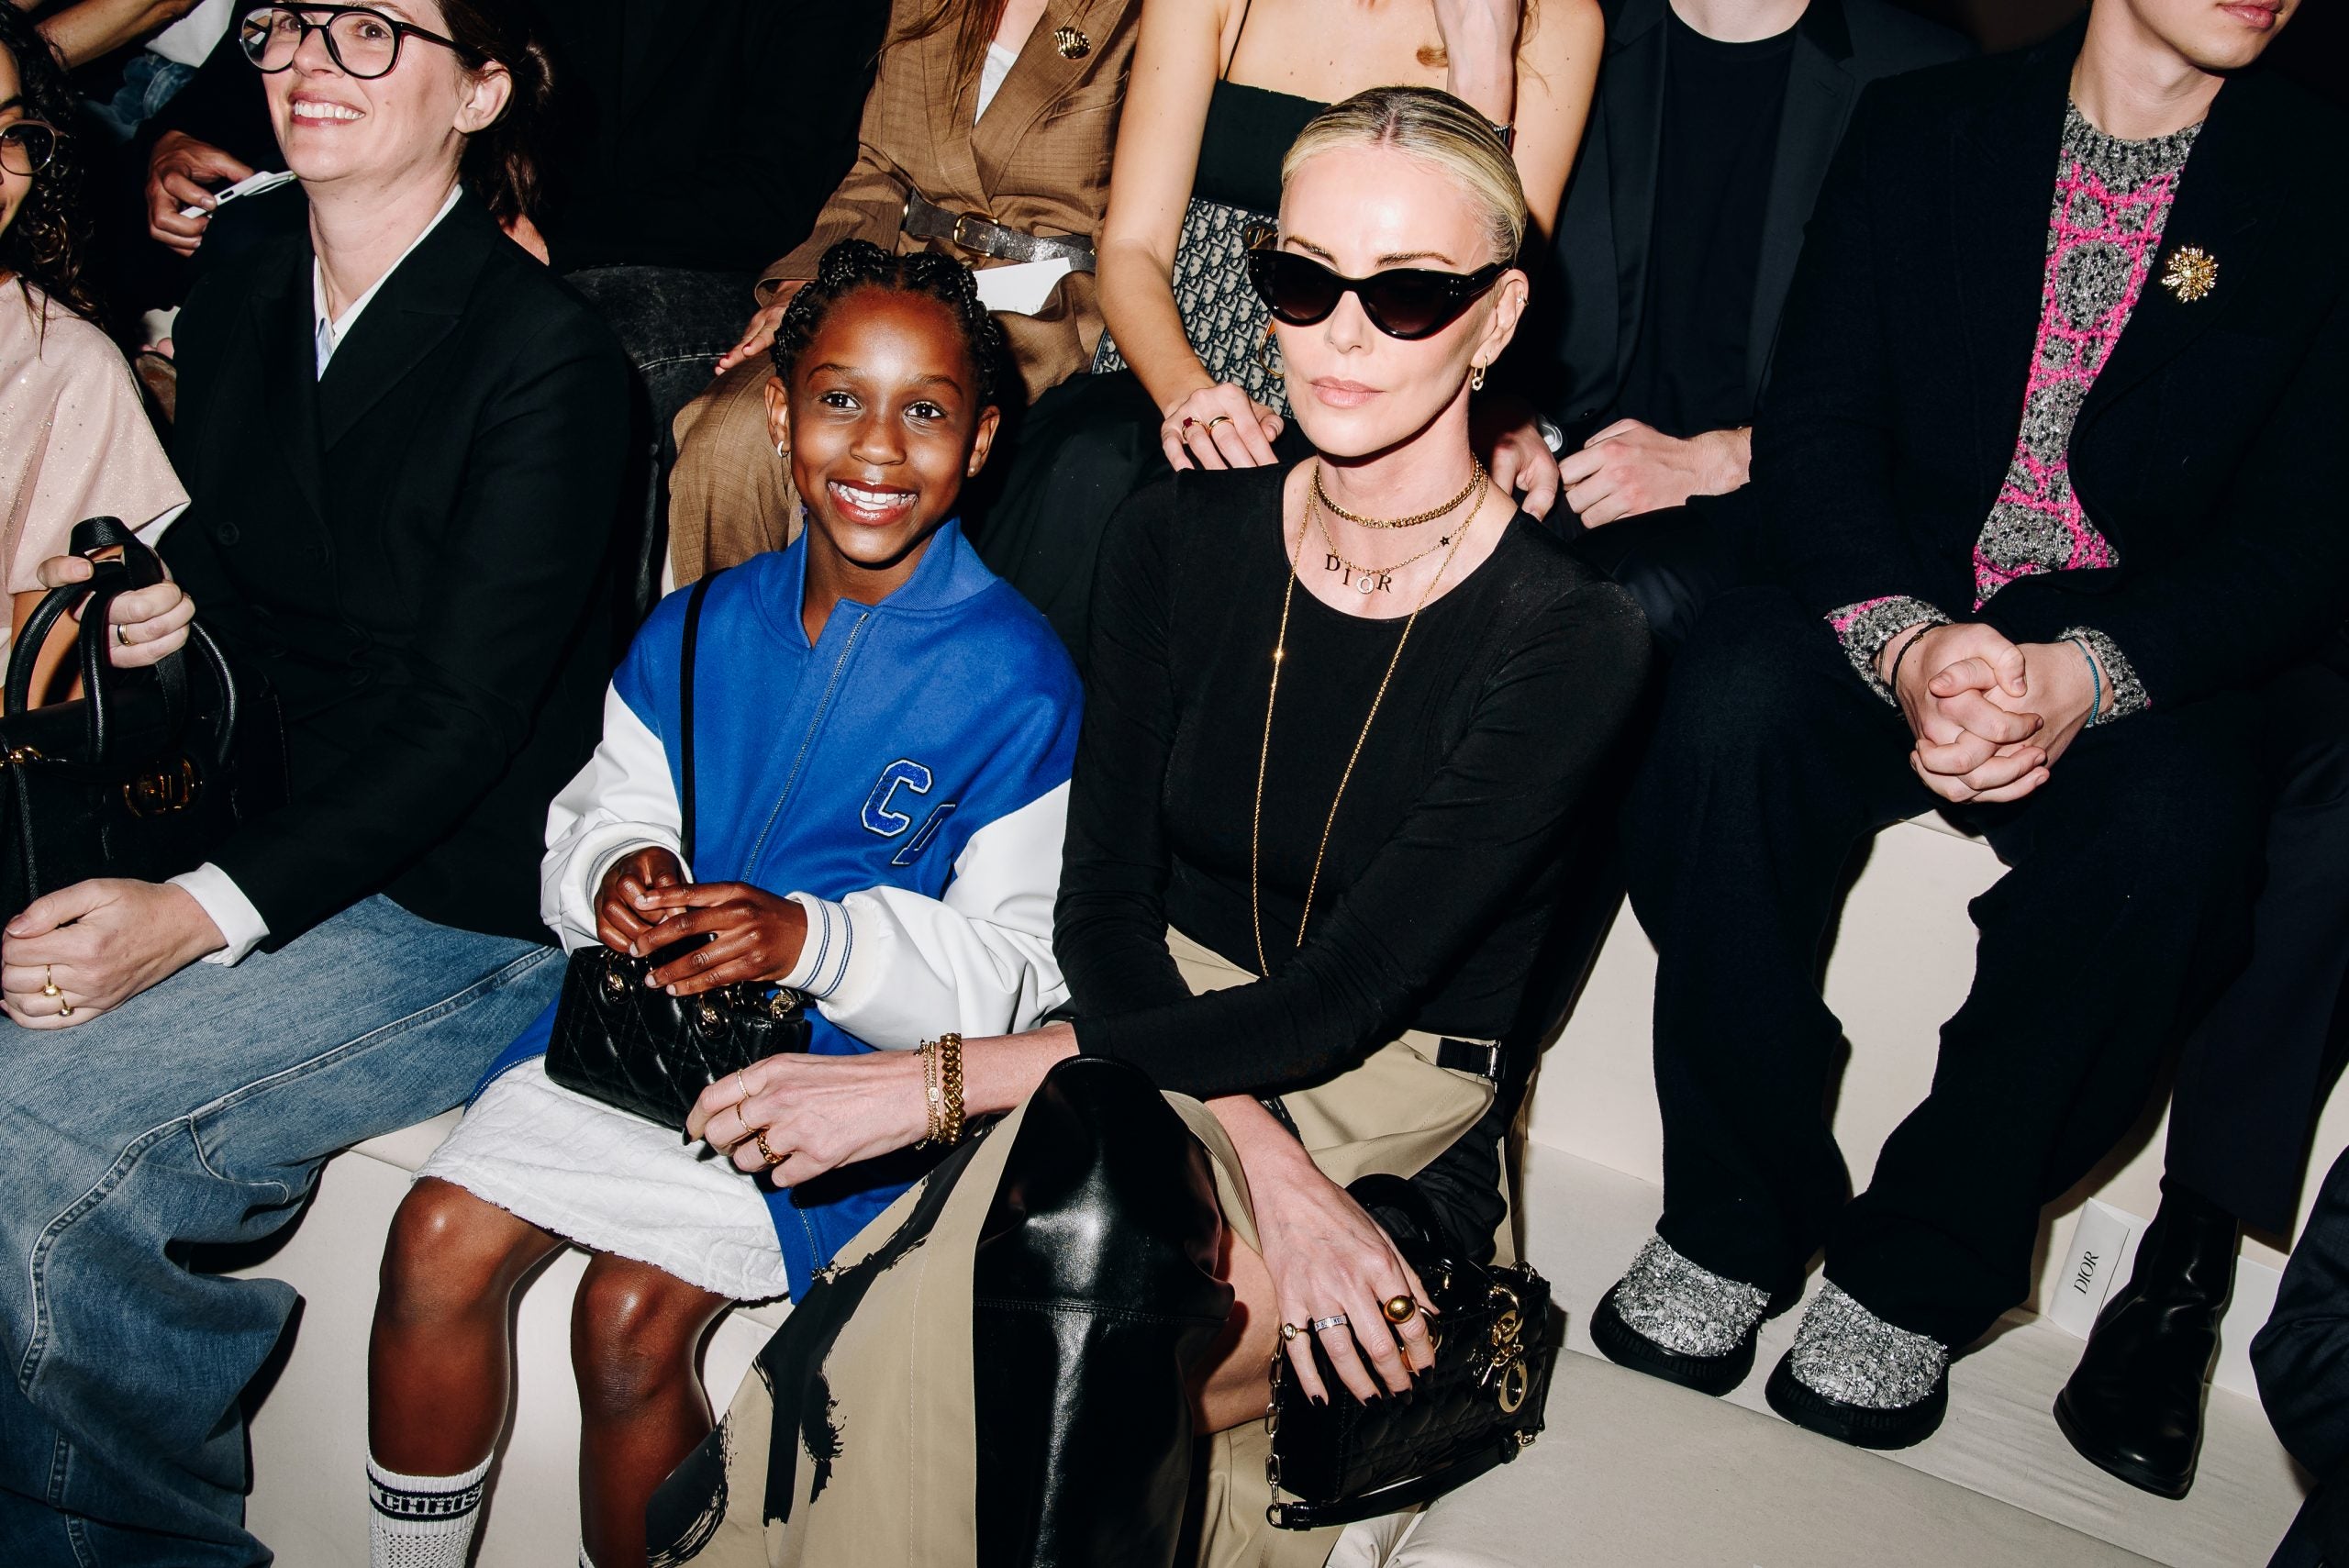 Charlize Theron And Daughter August Had The Cutest – And Most Stylish – Mother-Daughter Date At The Dior Fashion Show